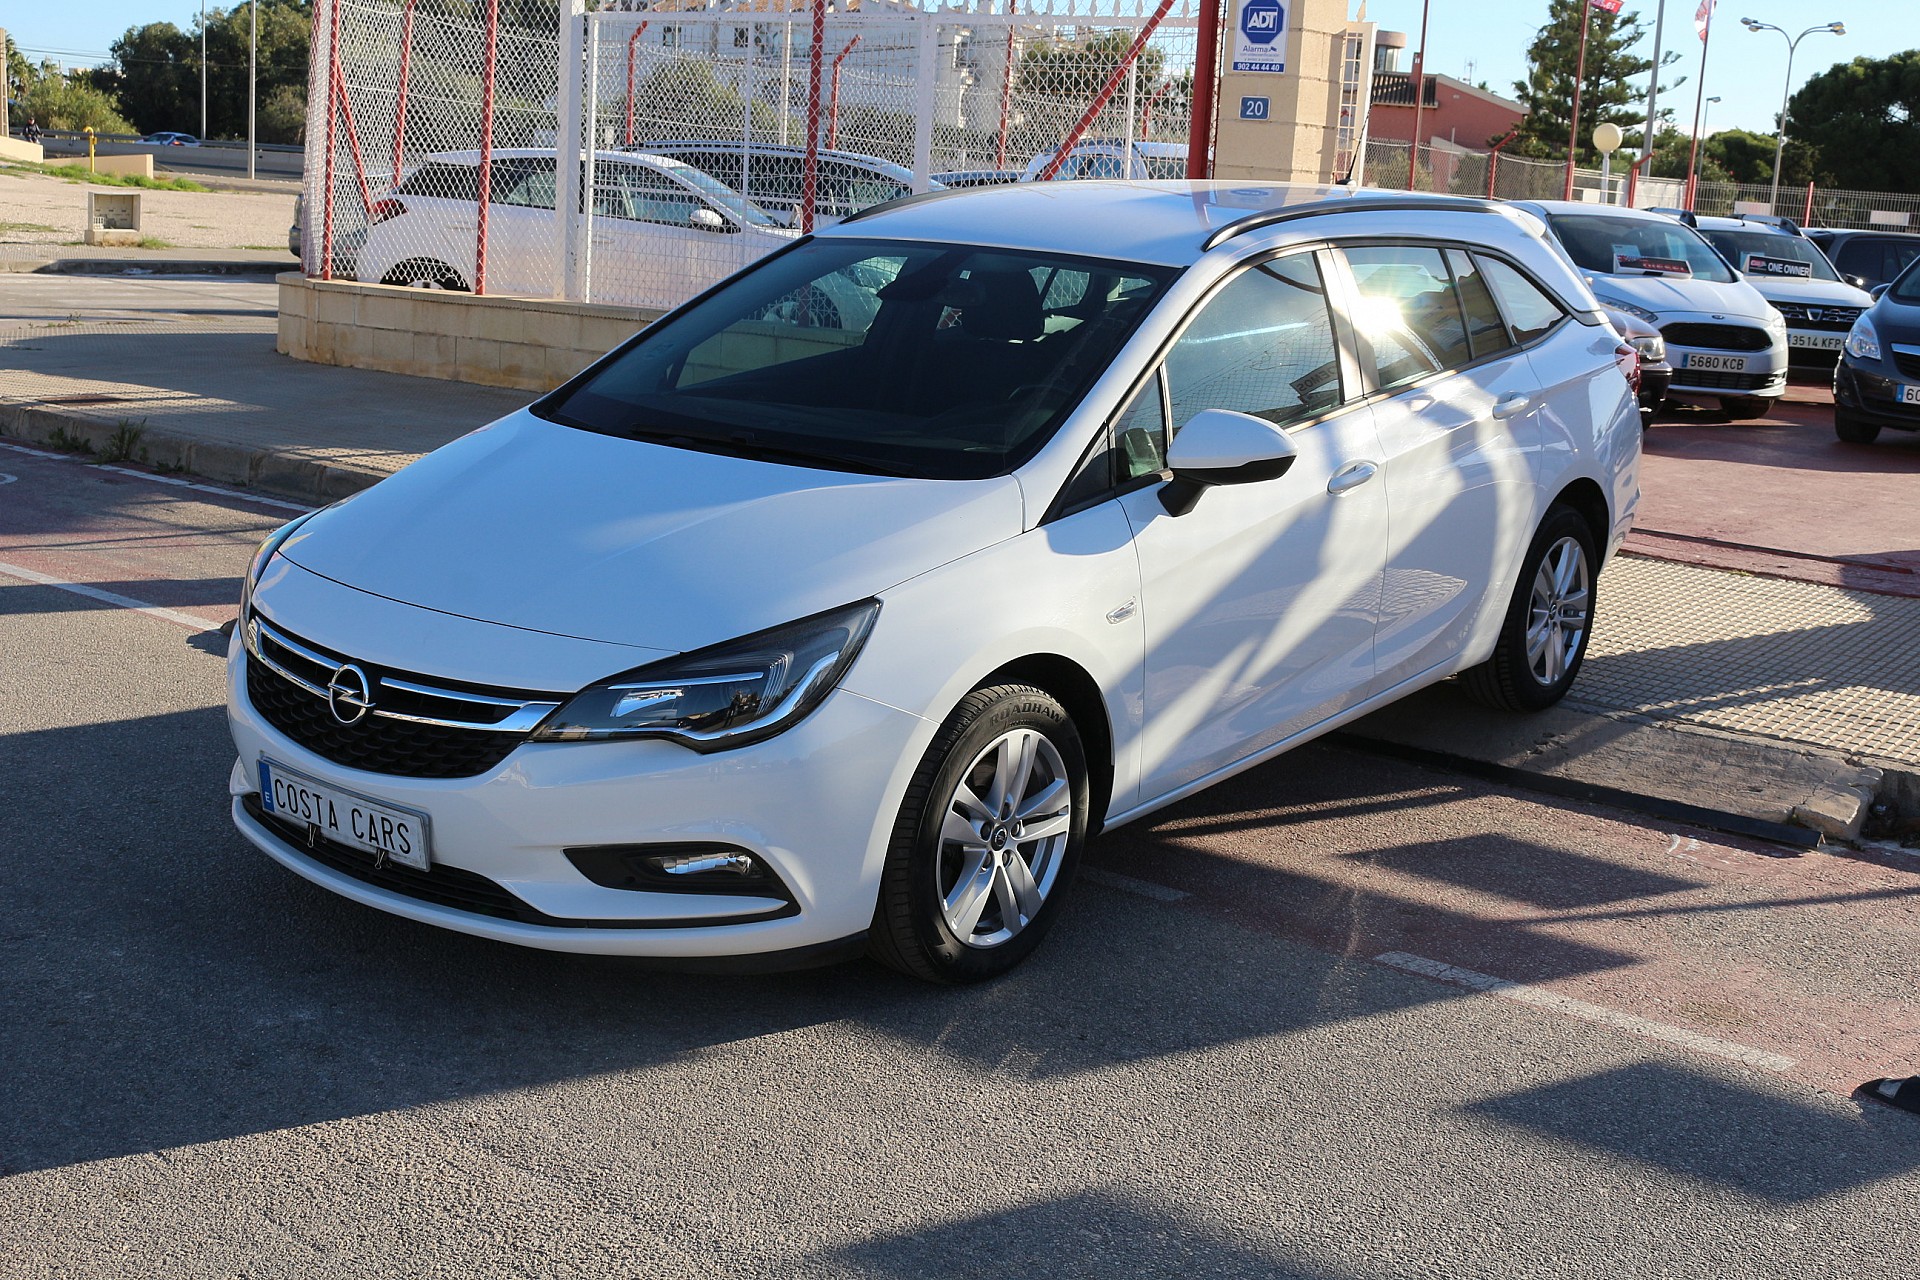 Opel ASTRA ST 1.6 CDTI SW BUSINESS + - Costa Cars